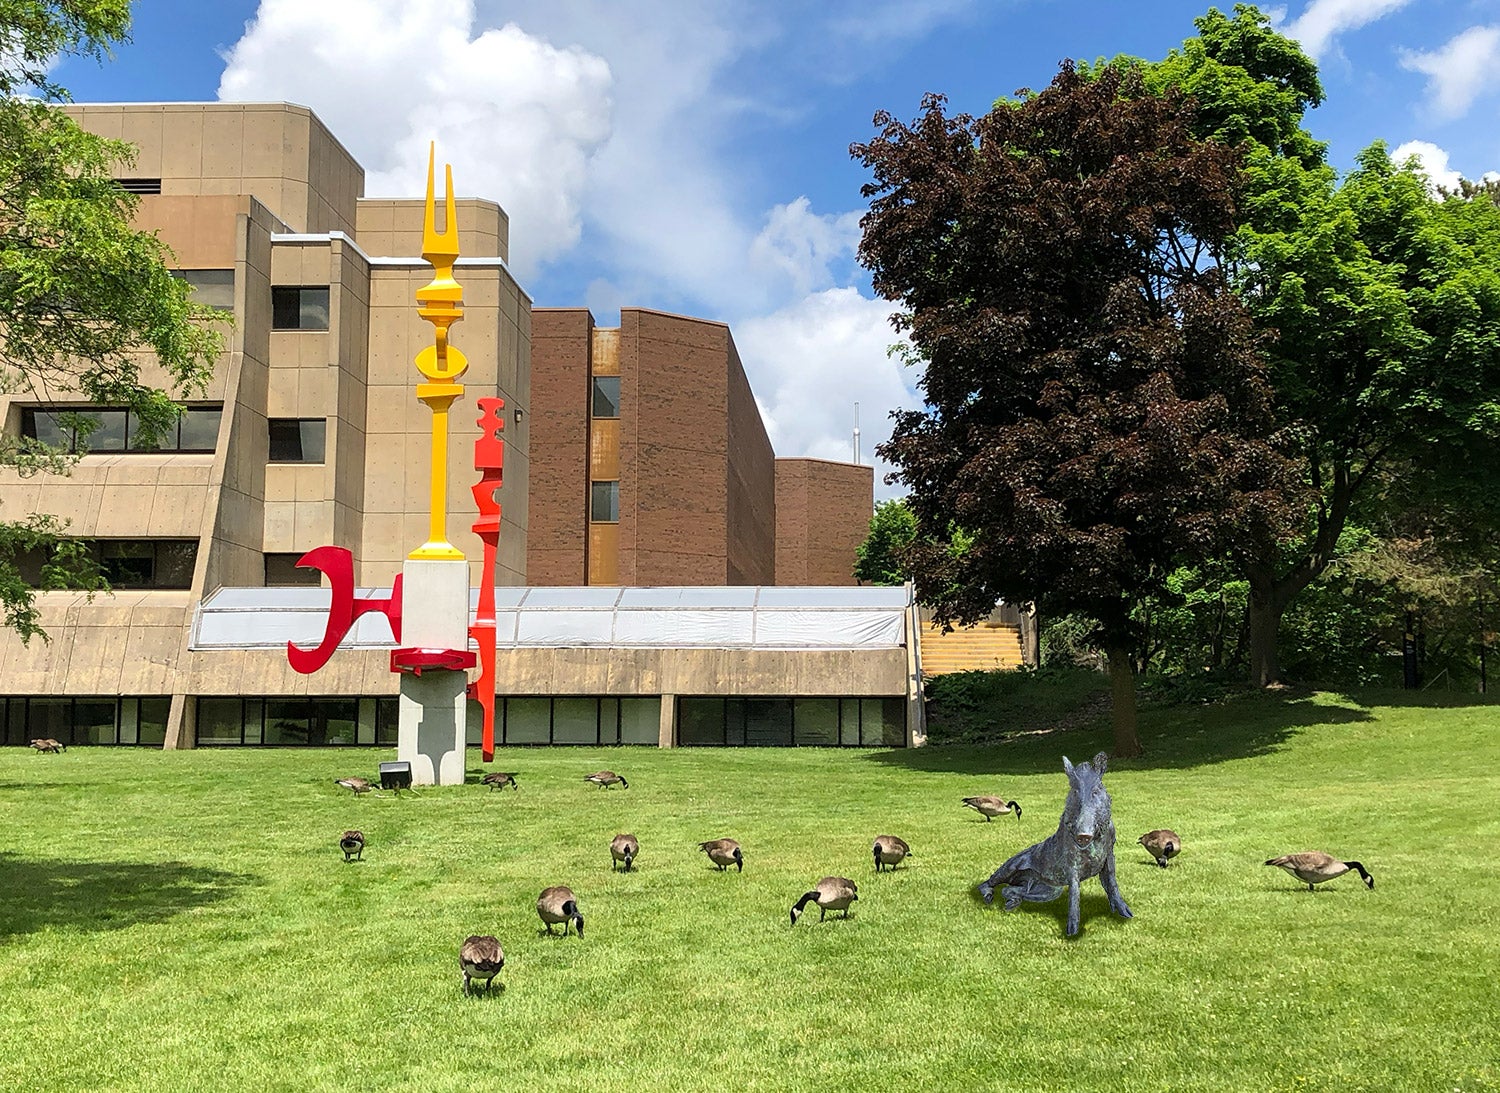 Porcellino among a group of hungry Canada geese on the lawn outside the PAS building, near the Pickle Forks sculpture